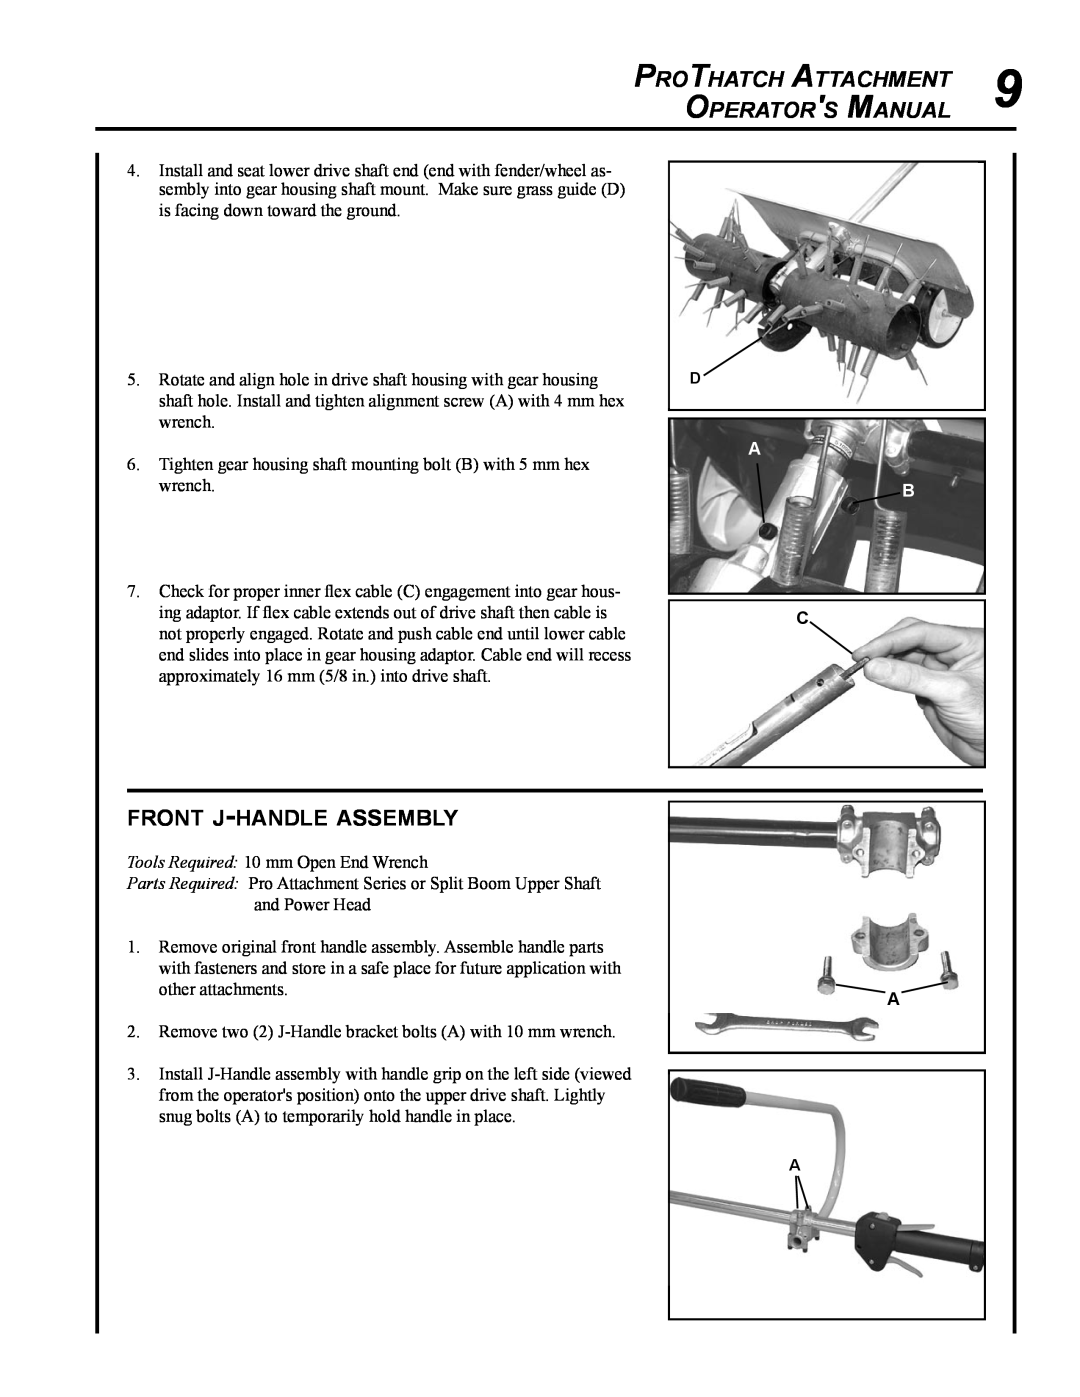 Echo 99944200563 manual front j-handleassembly, ProThatch Attachment, Operators Manual 